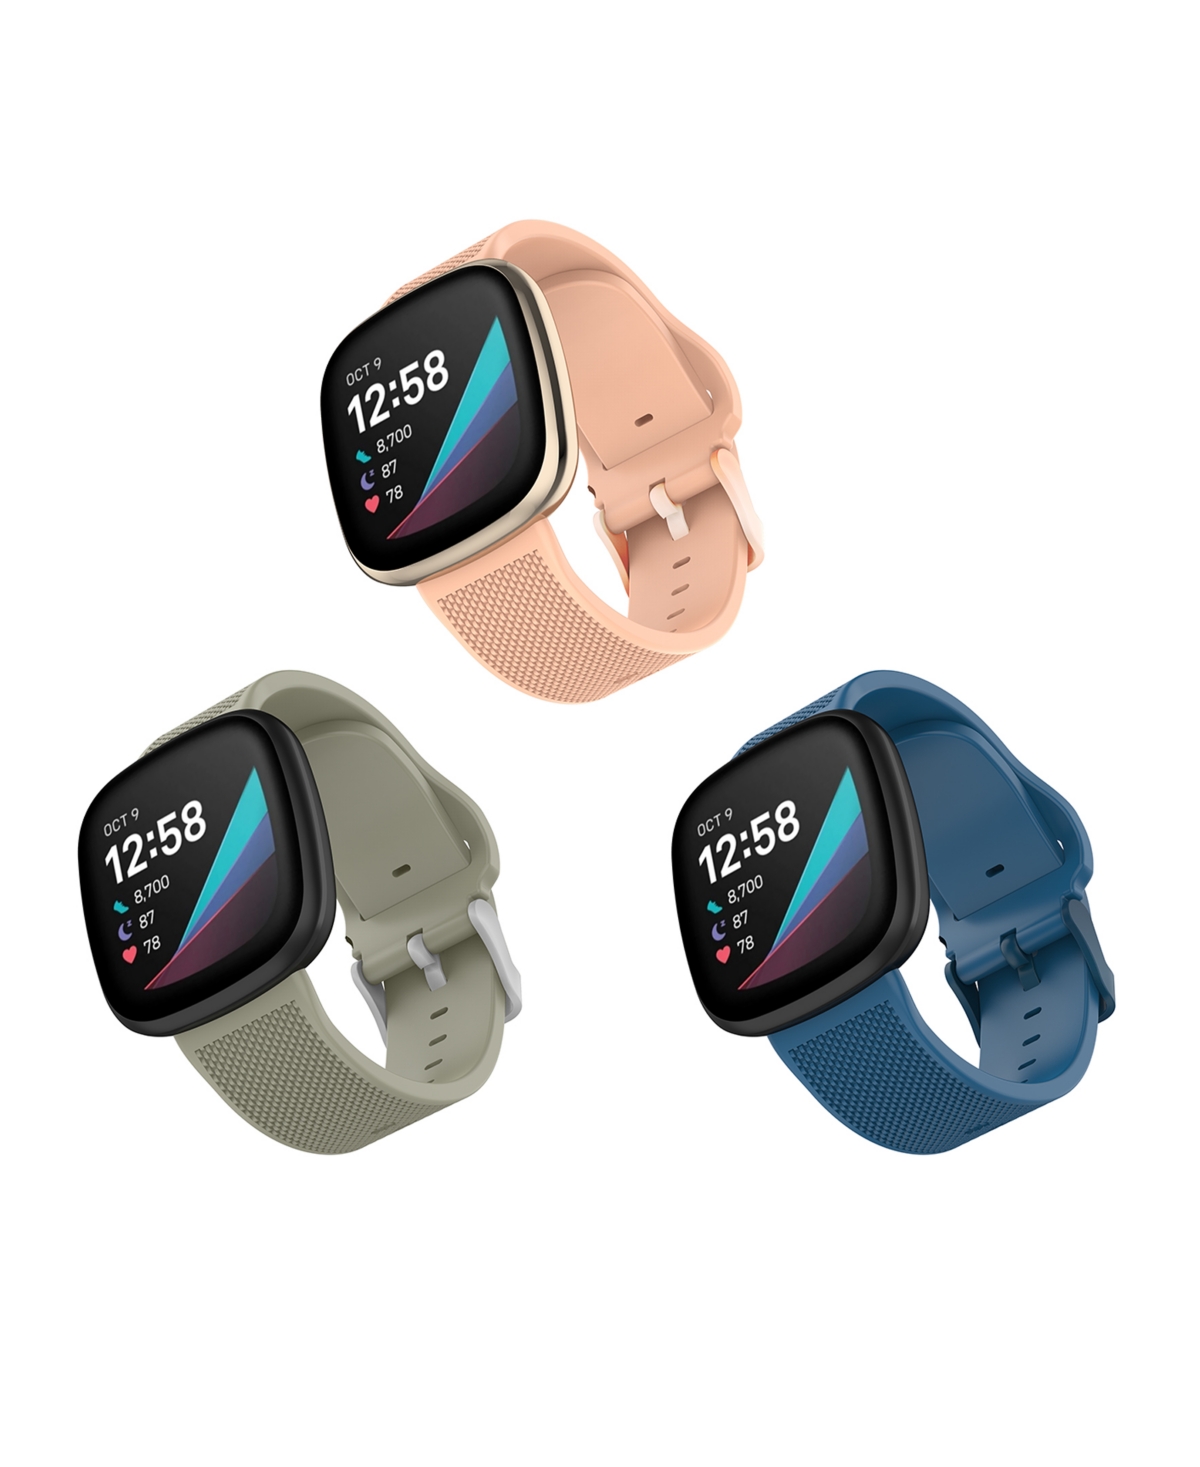 Gray, Light Pink and Navy Woven Silicone Band Set, 3 Piece Compatible with the Fitbit Versa 3 and Fitbit Sense - Blue, Light Pink, Gray